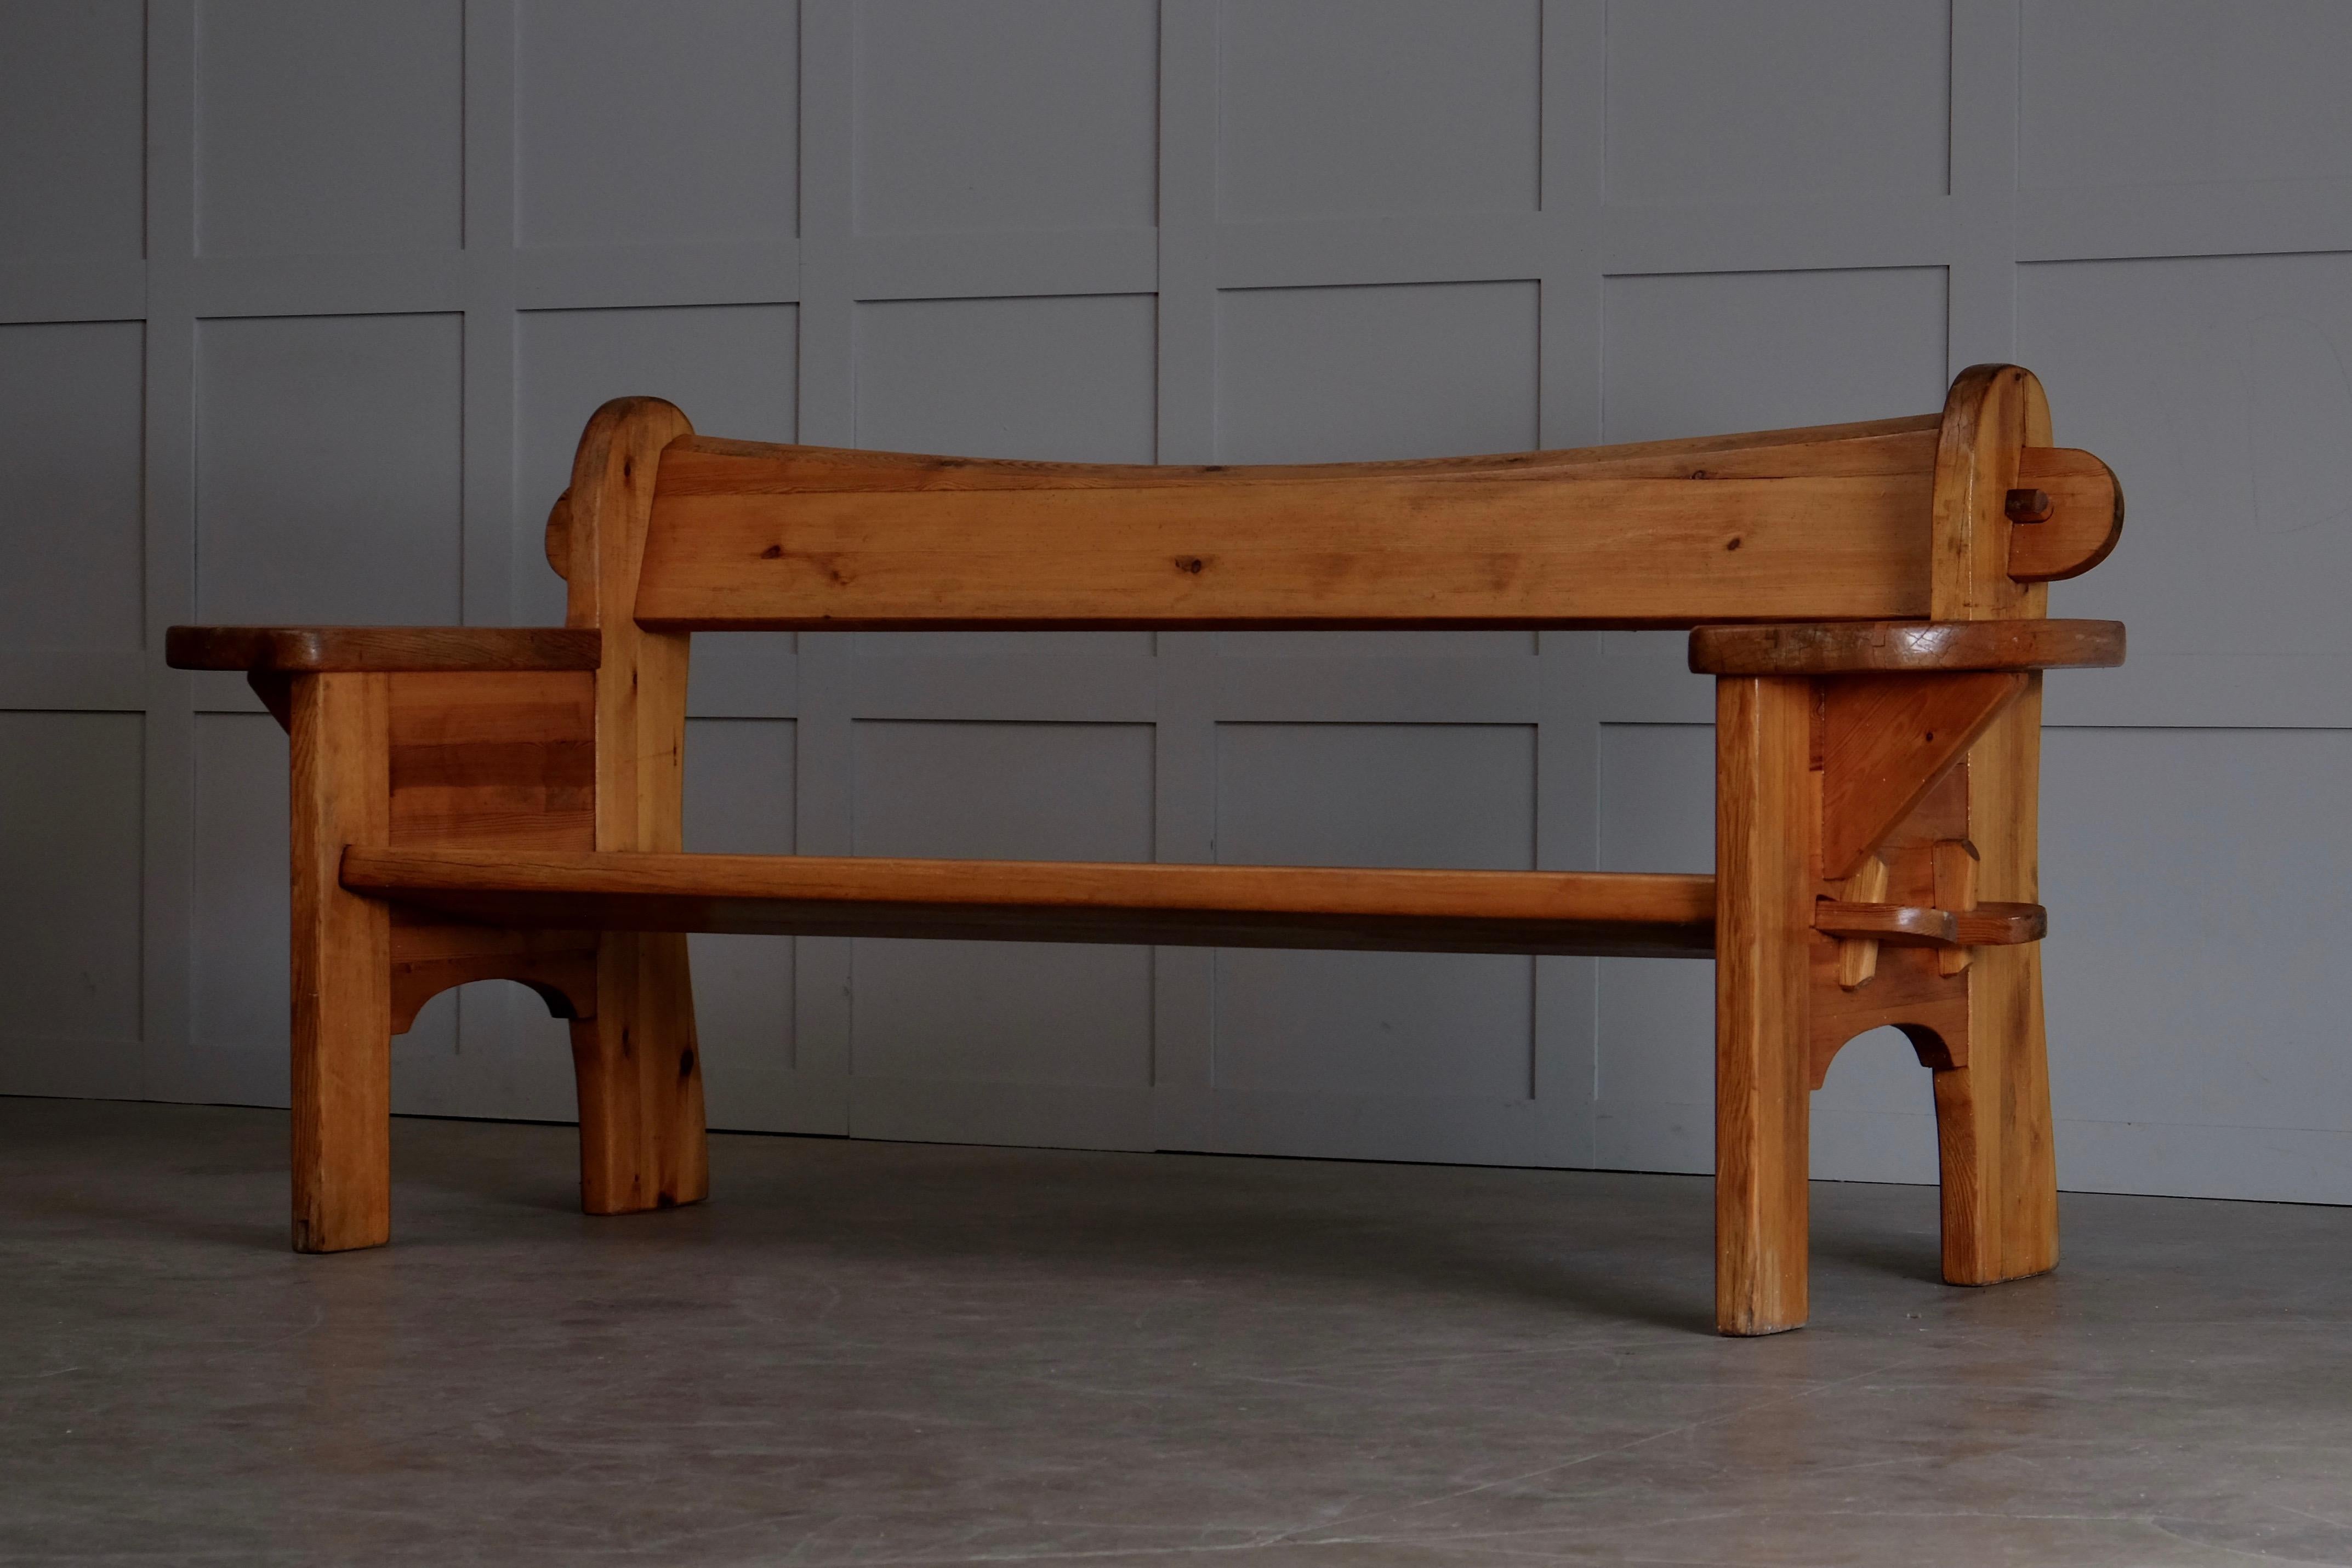 Pine sofa or bench produced in Sweden by Nordiska Kompaniet, 1960s.
Good condition, solid and stable.
  